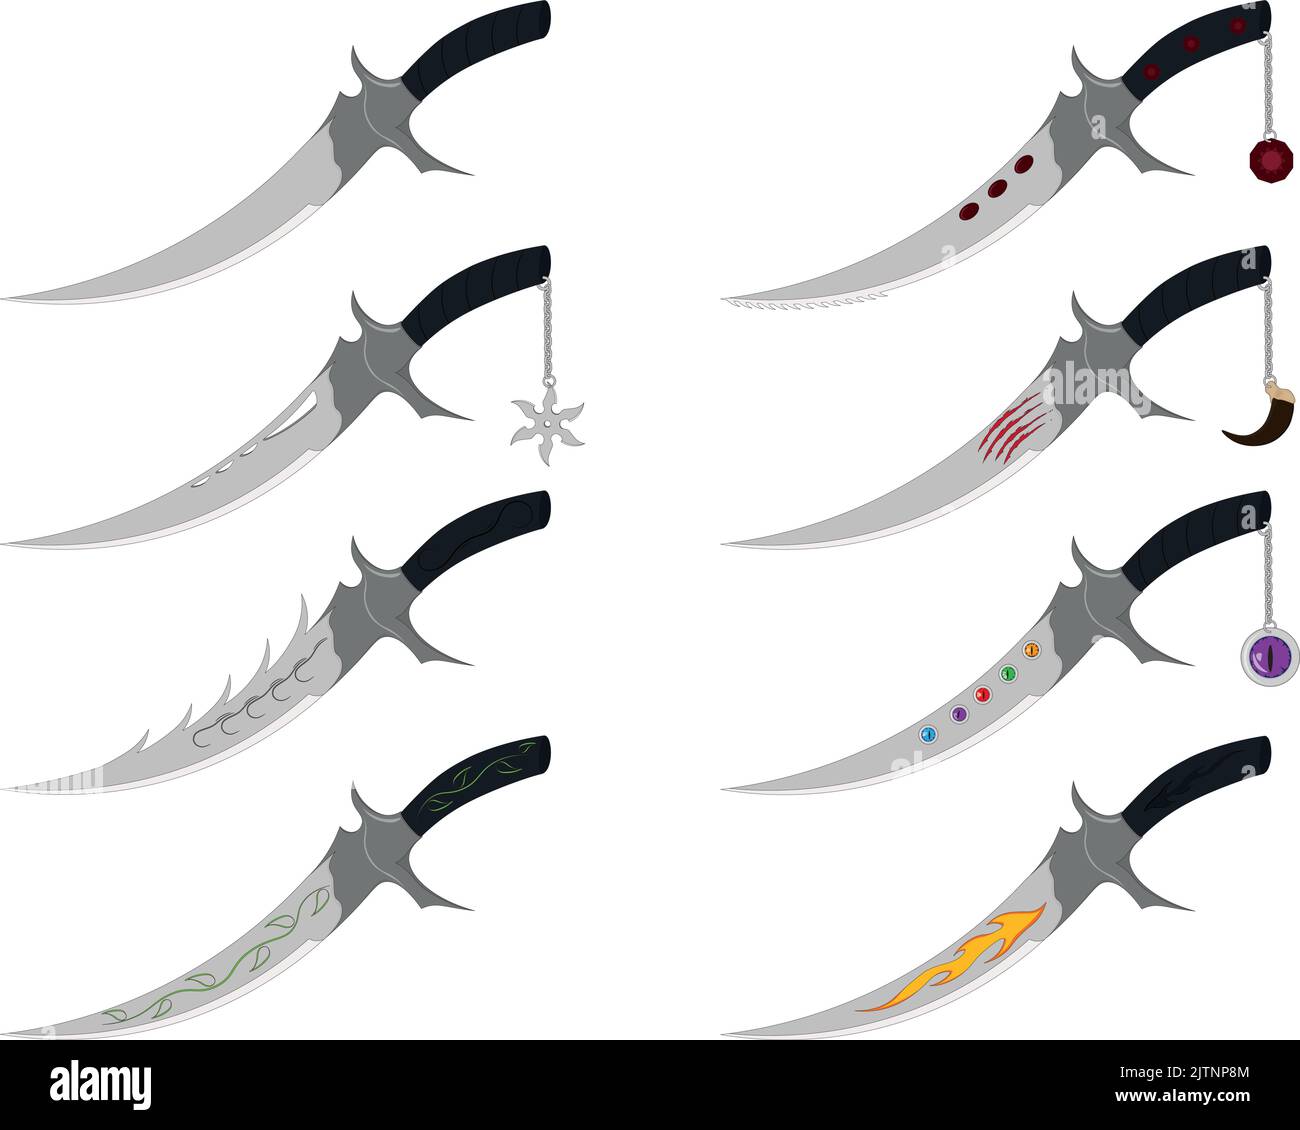 Cold cutting weapon game asset, various styles dagger collection vector illustration Stock Vector